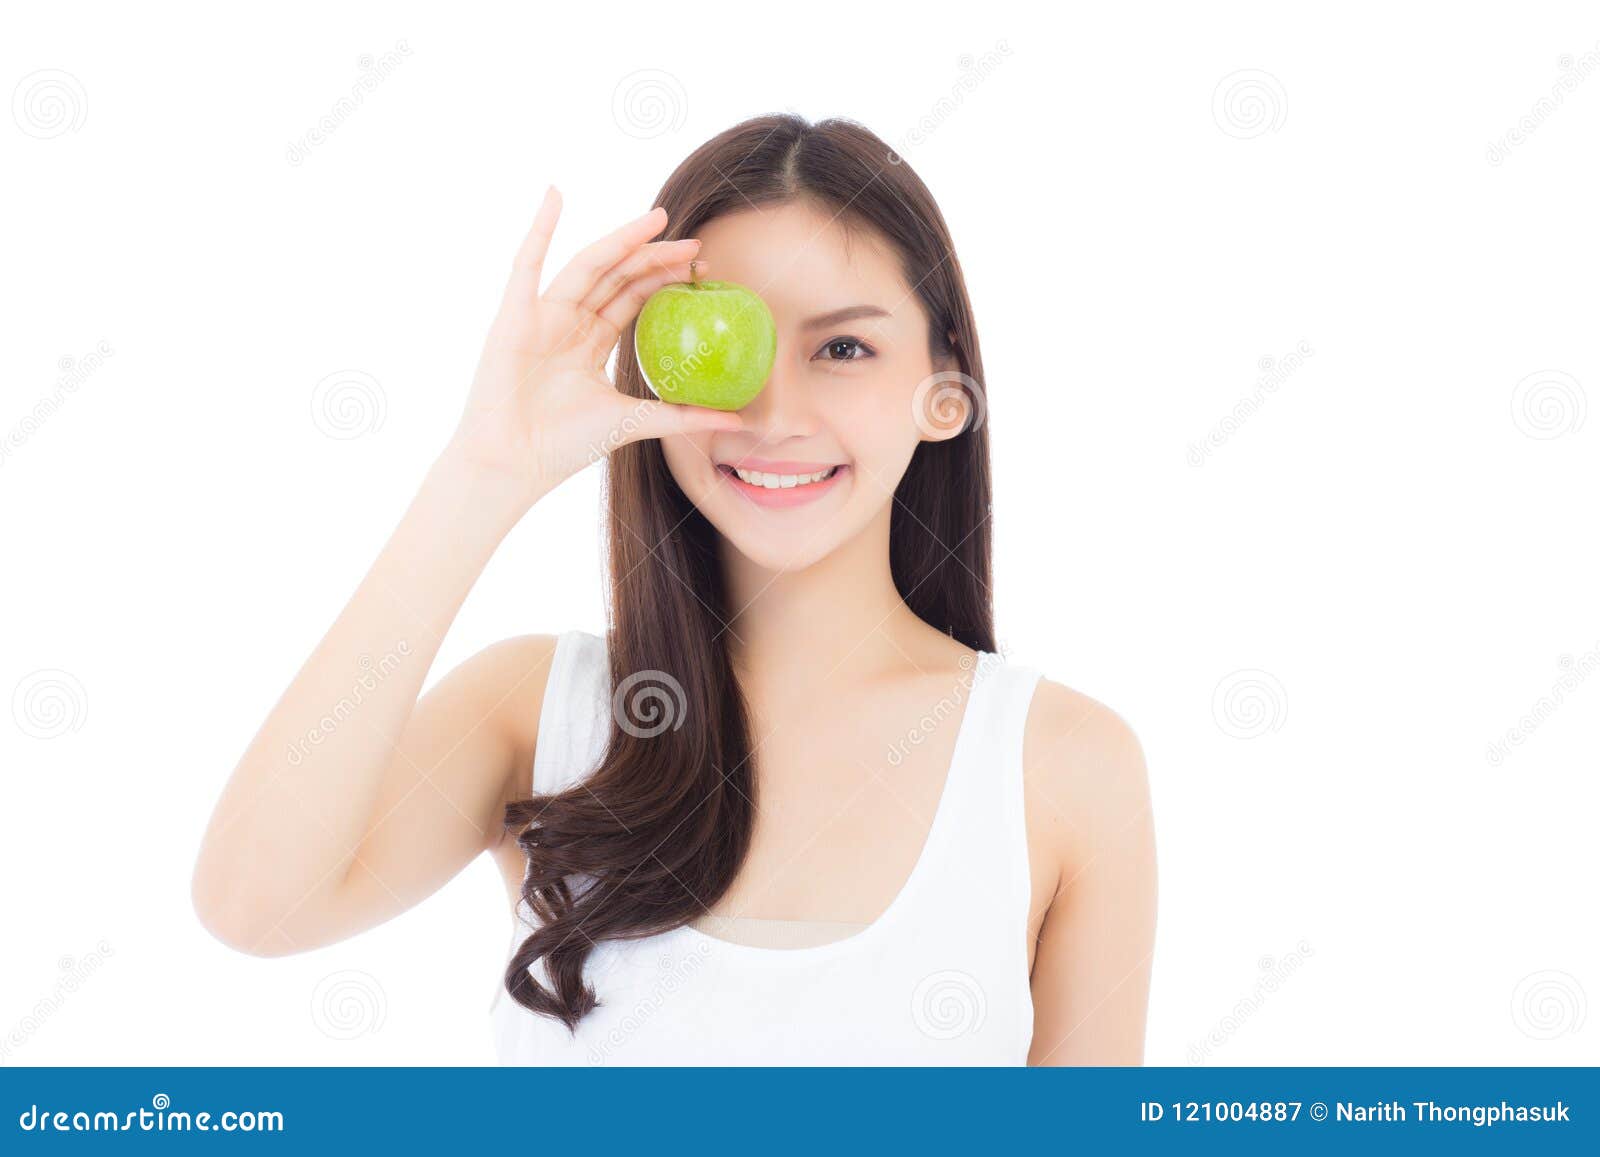 girl with apple Asian